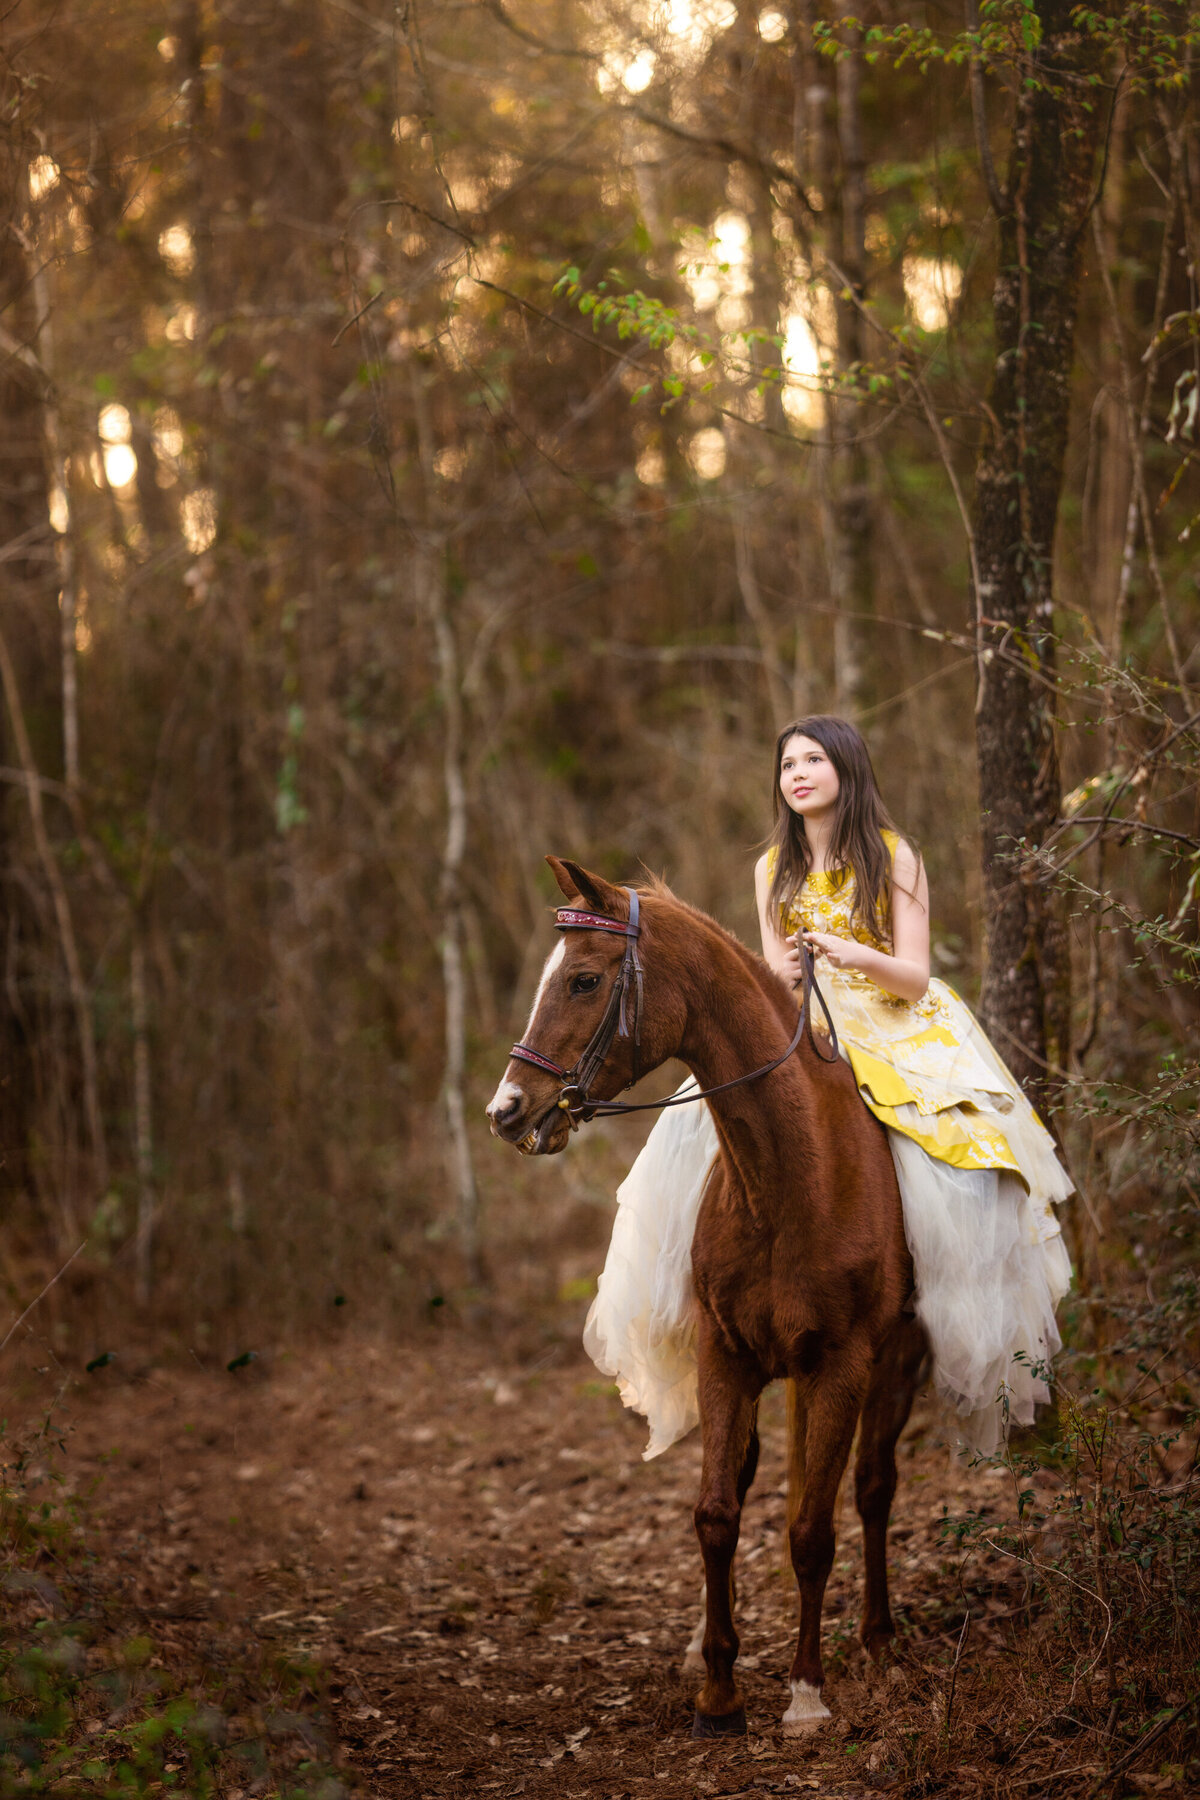 10 year old girl is riding an Arabian horse on a trail.  The girl is wearing a mustard and cream tulle gown.  The brown horse has her head turned and her ears forward.  The girl is looking up into the distance and holding the reigns.  There are lots of brown leaves on the ground.